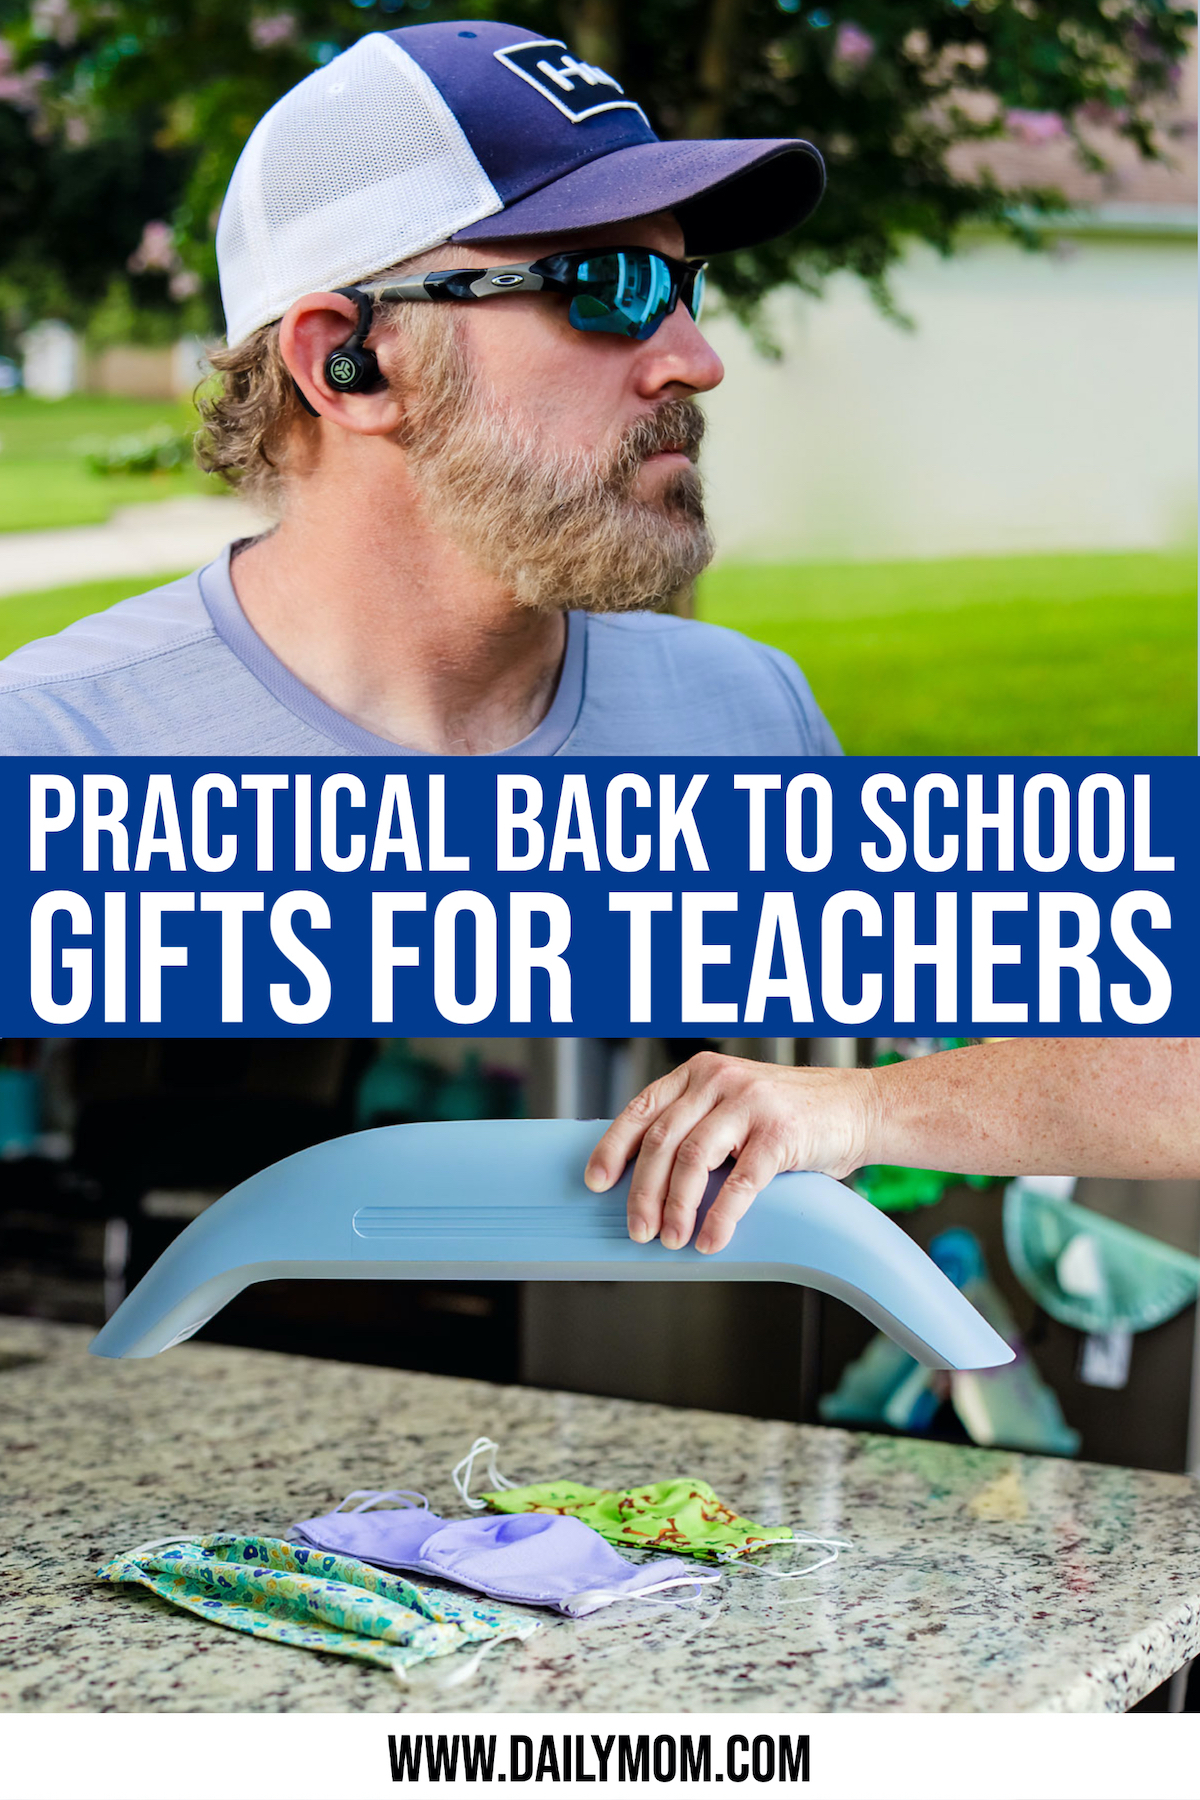 21 Practical Back To School Gifts For Teachers That Will Show Them You Care